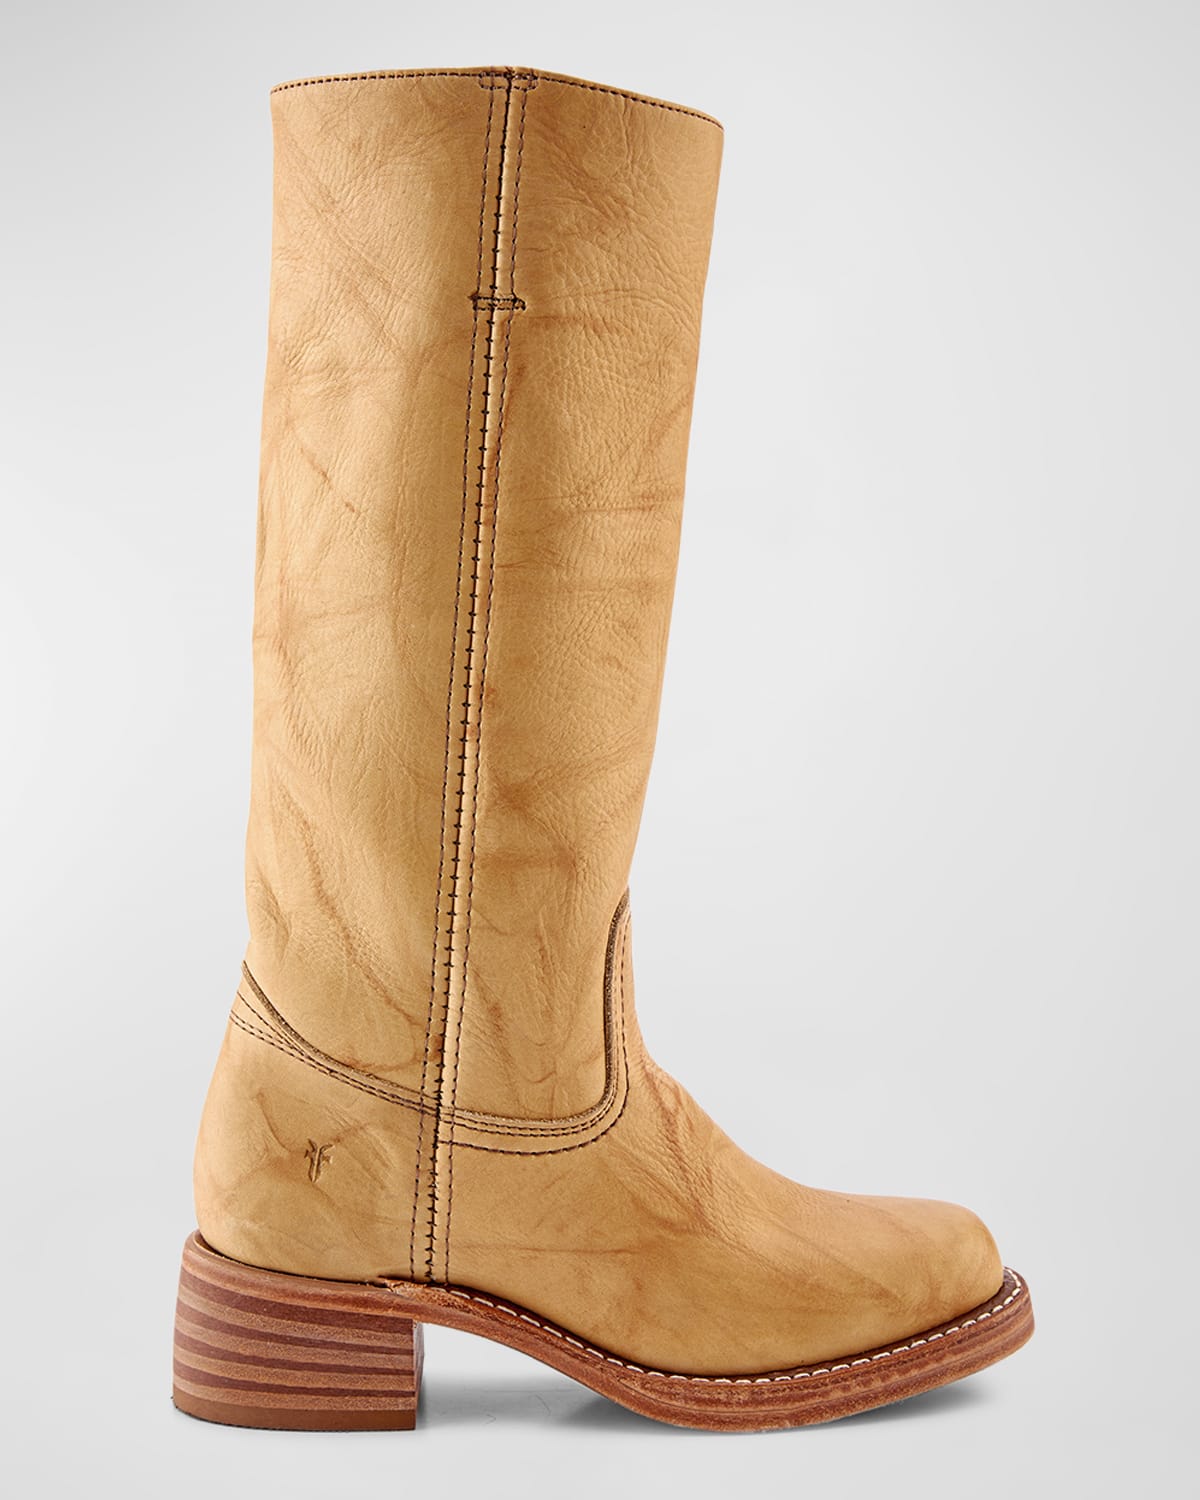 Campus Tall Leather Riding Boots